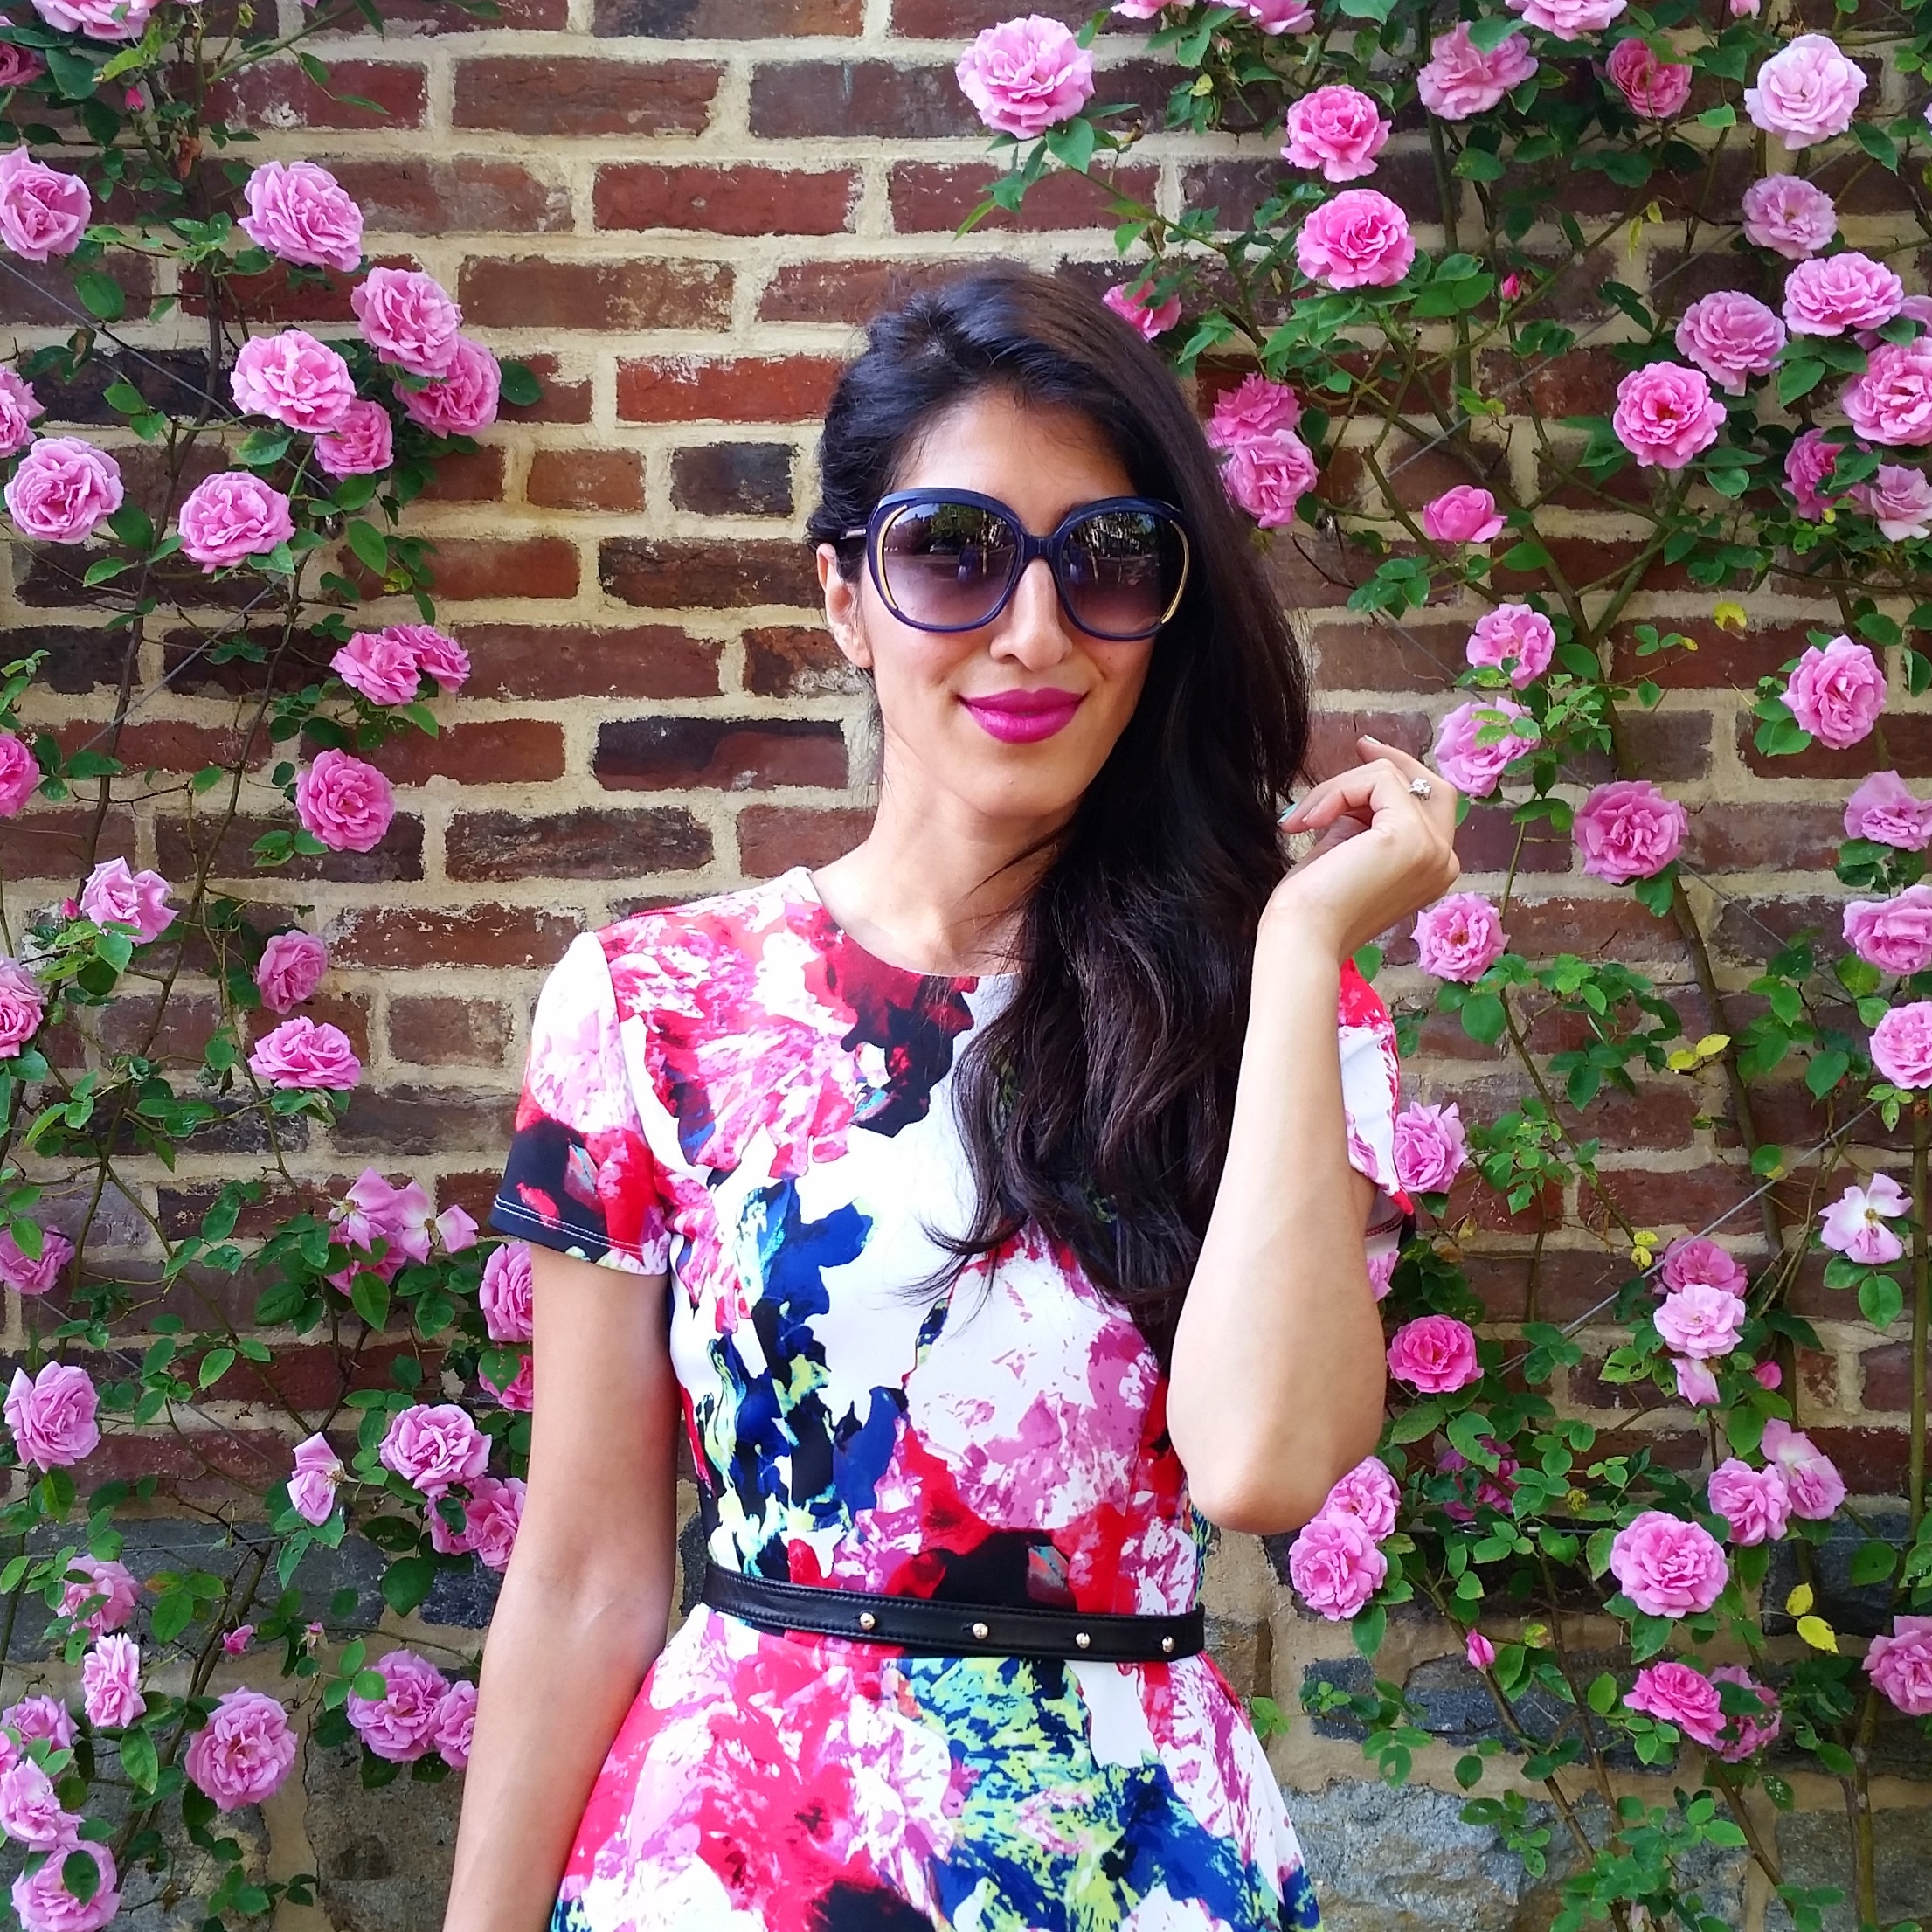 On weekends, we wear BRIGHT and BOLD floral prints with painterly effects! Milly makes some of my favorite printed dresses, and this one is no exception!